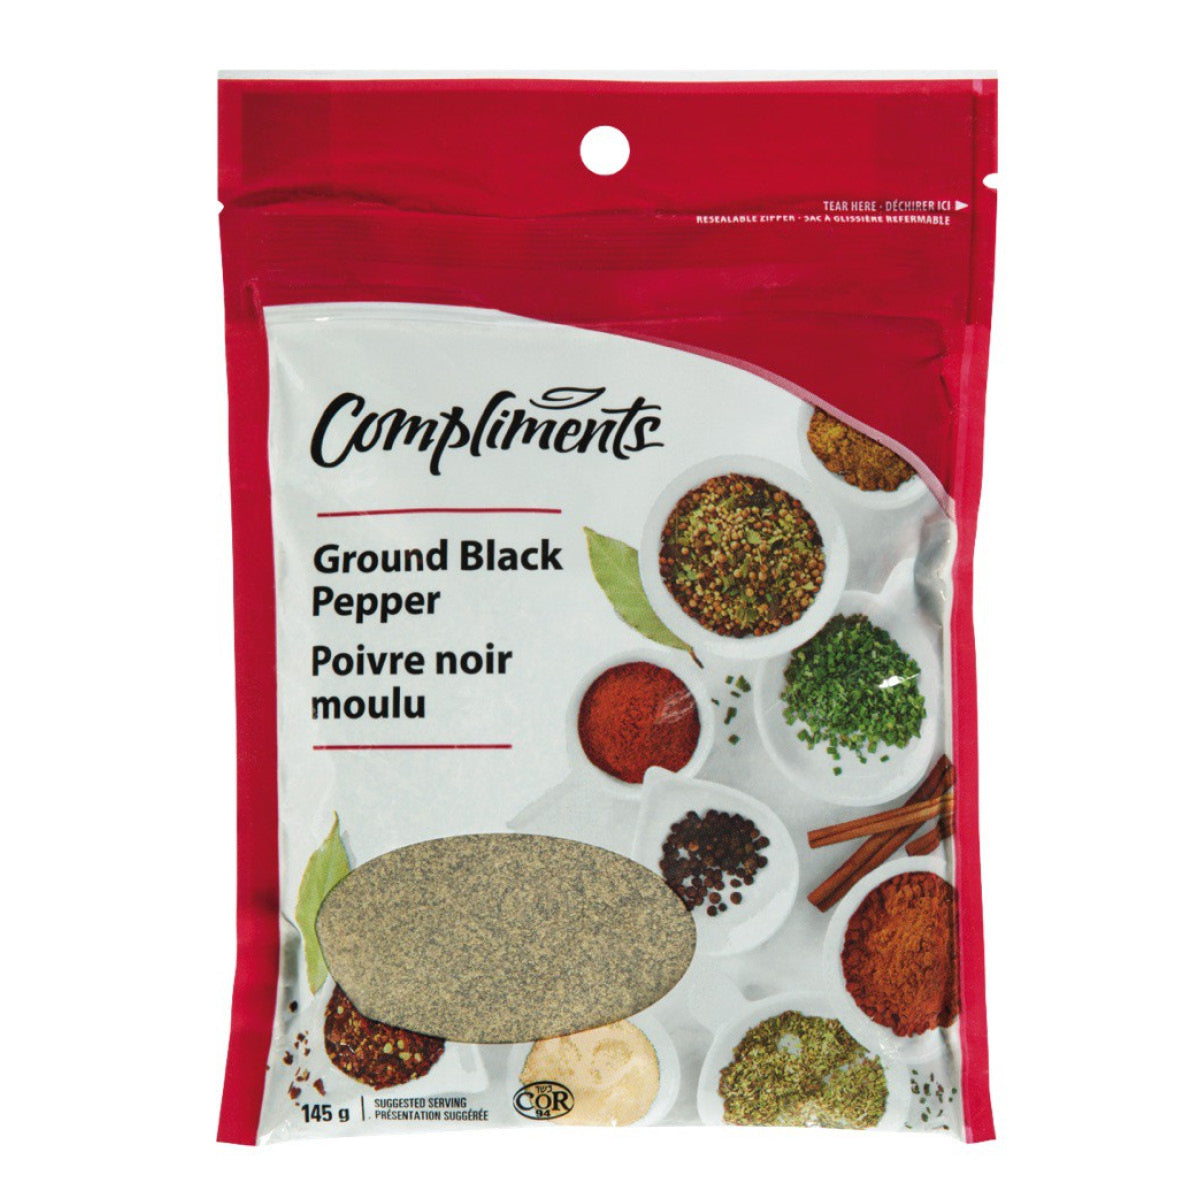 Compliments Ground Black Pepper, 145G